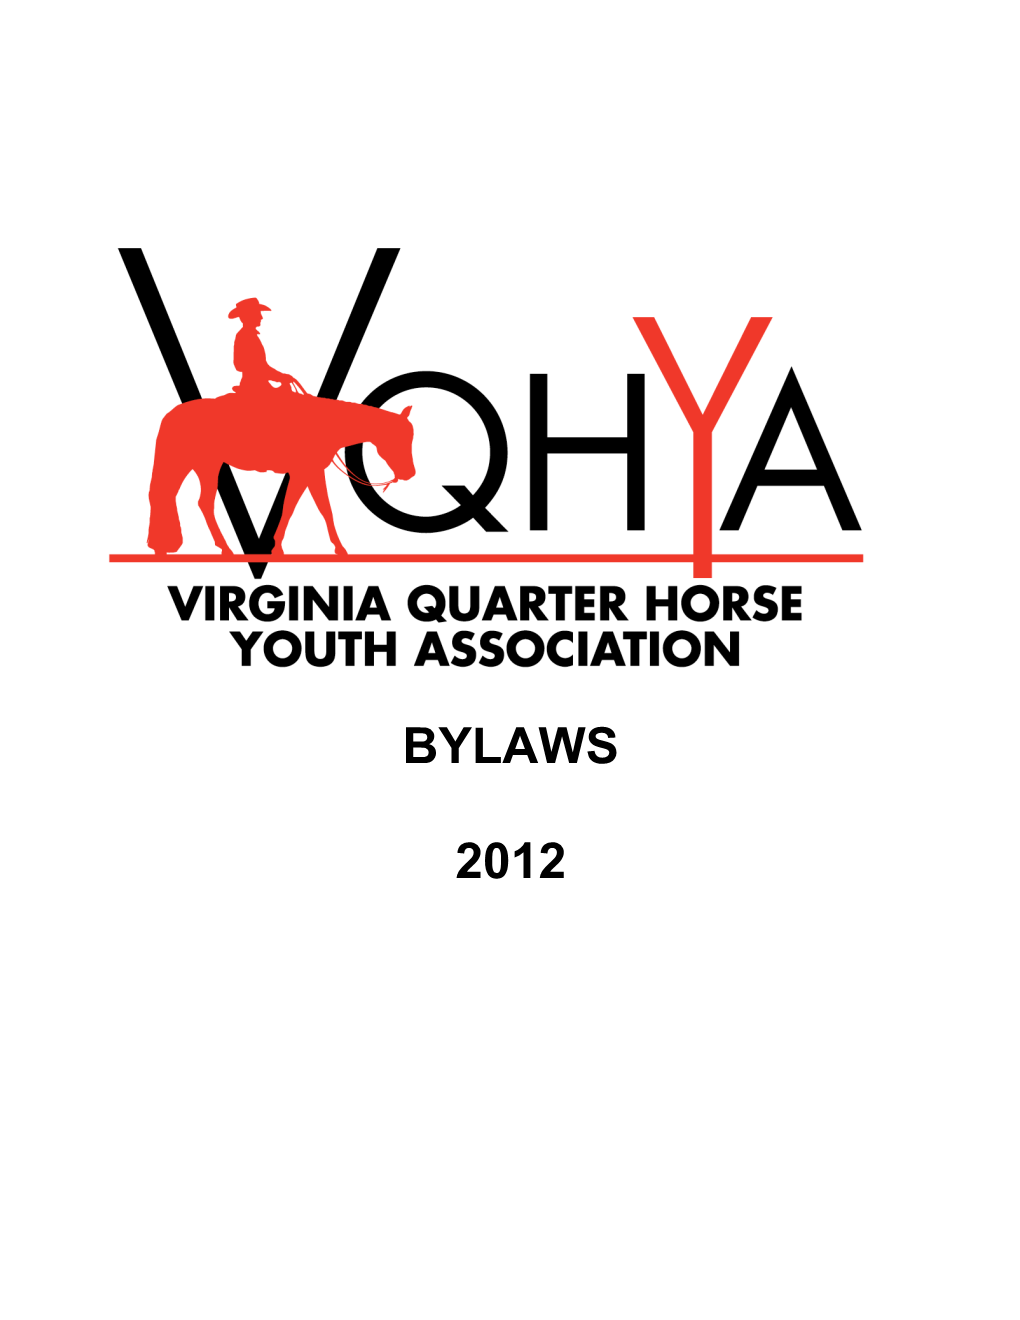 The Virginia Quarter Horse Youth Association 2003 Bylaws